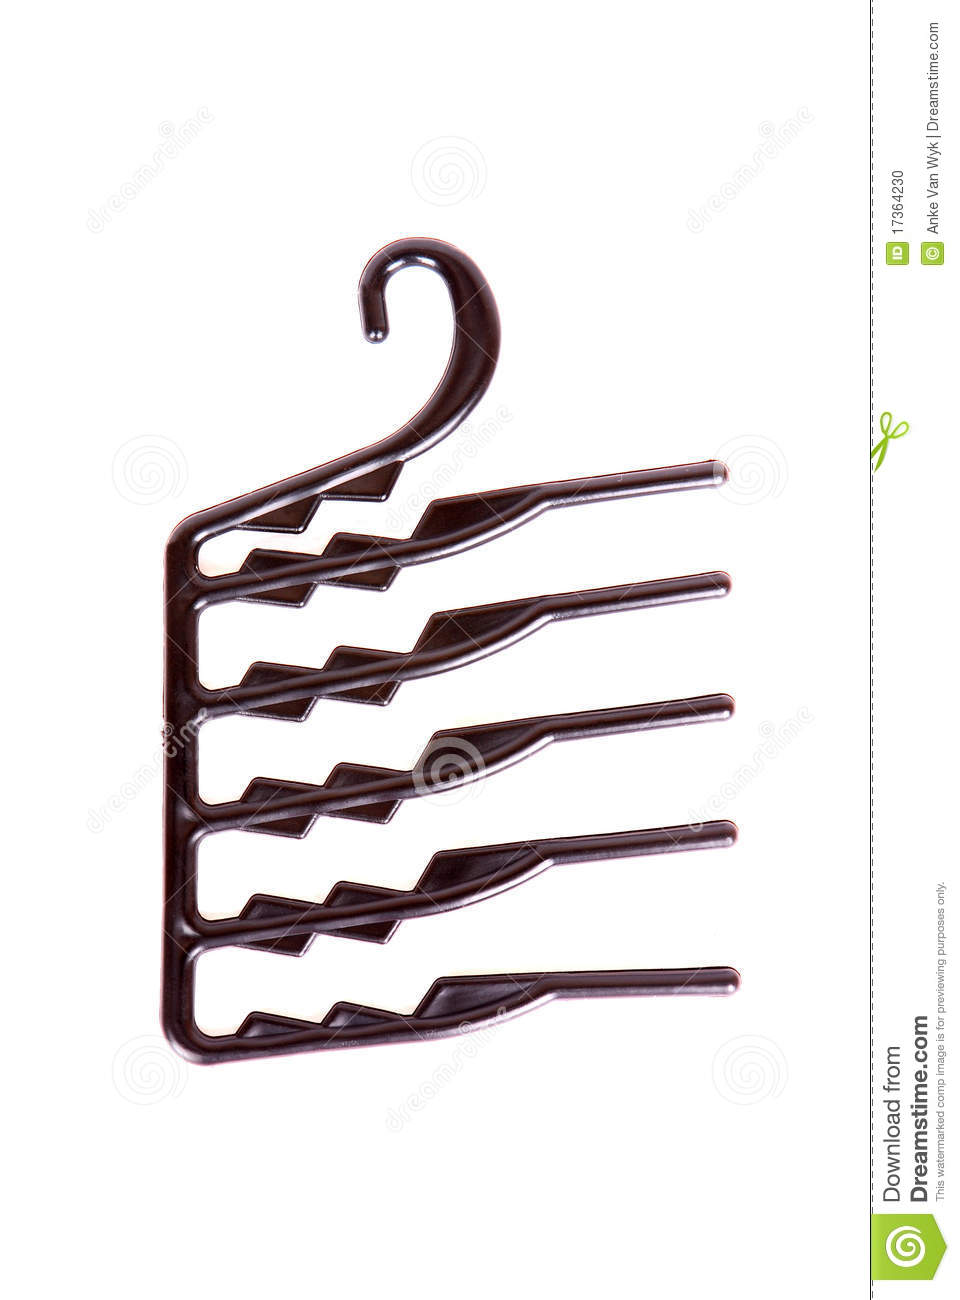 Big Black Plastic Hanger For Five Trousers  Image Isolated On White